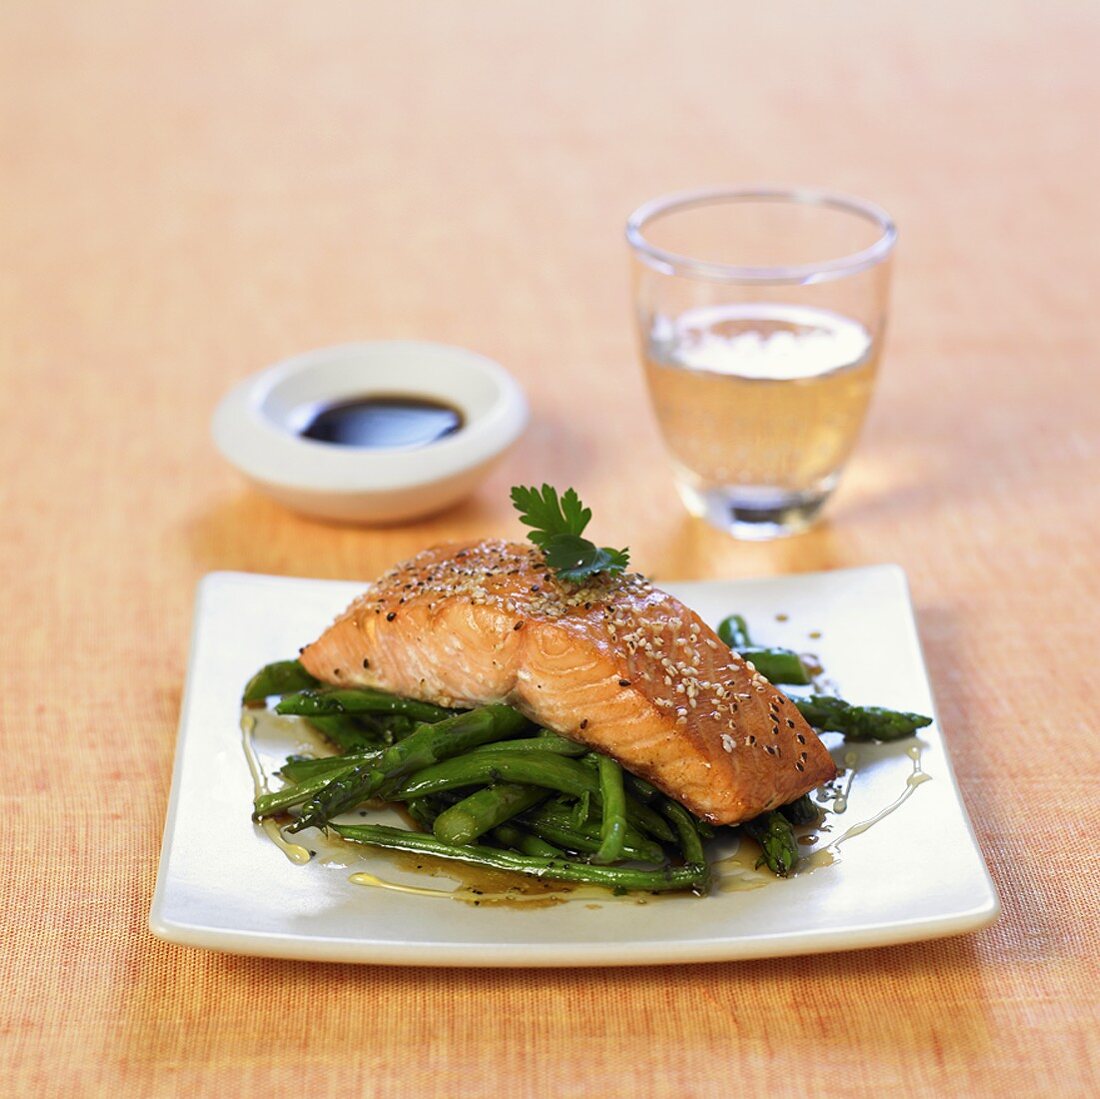 Salmon fillet with sesame seeds on green asparagus & beans